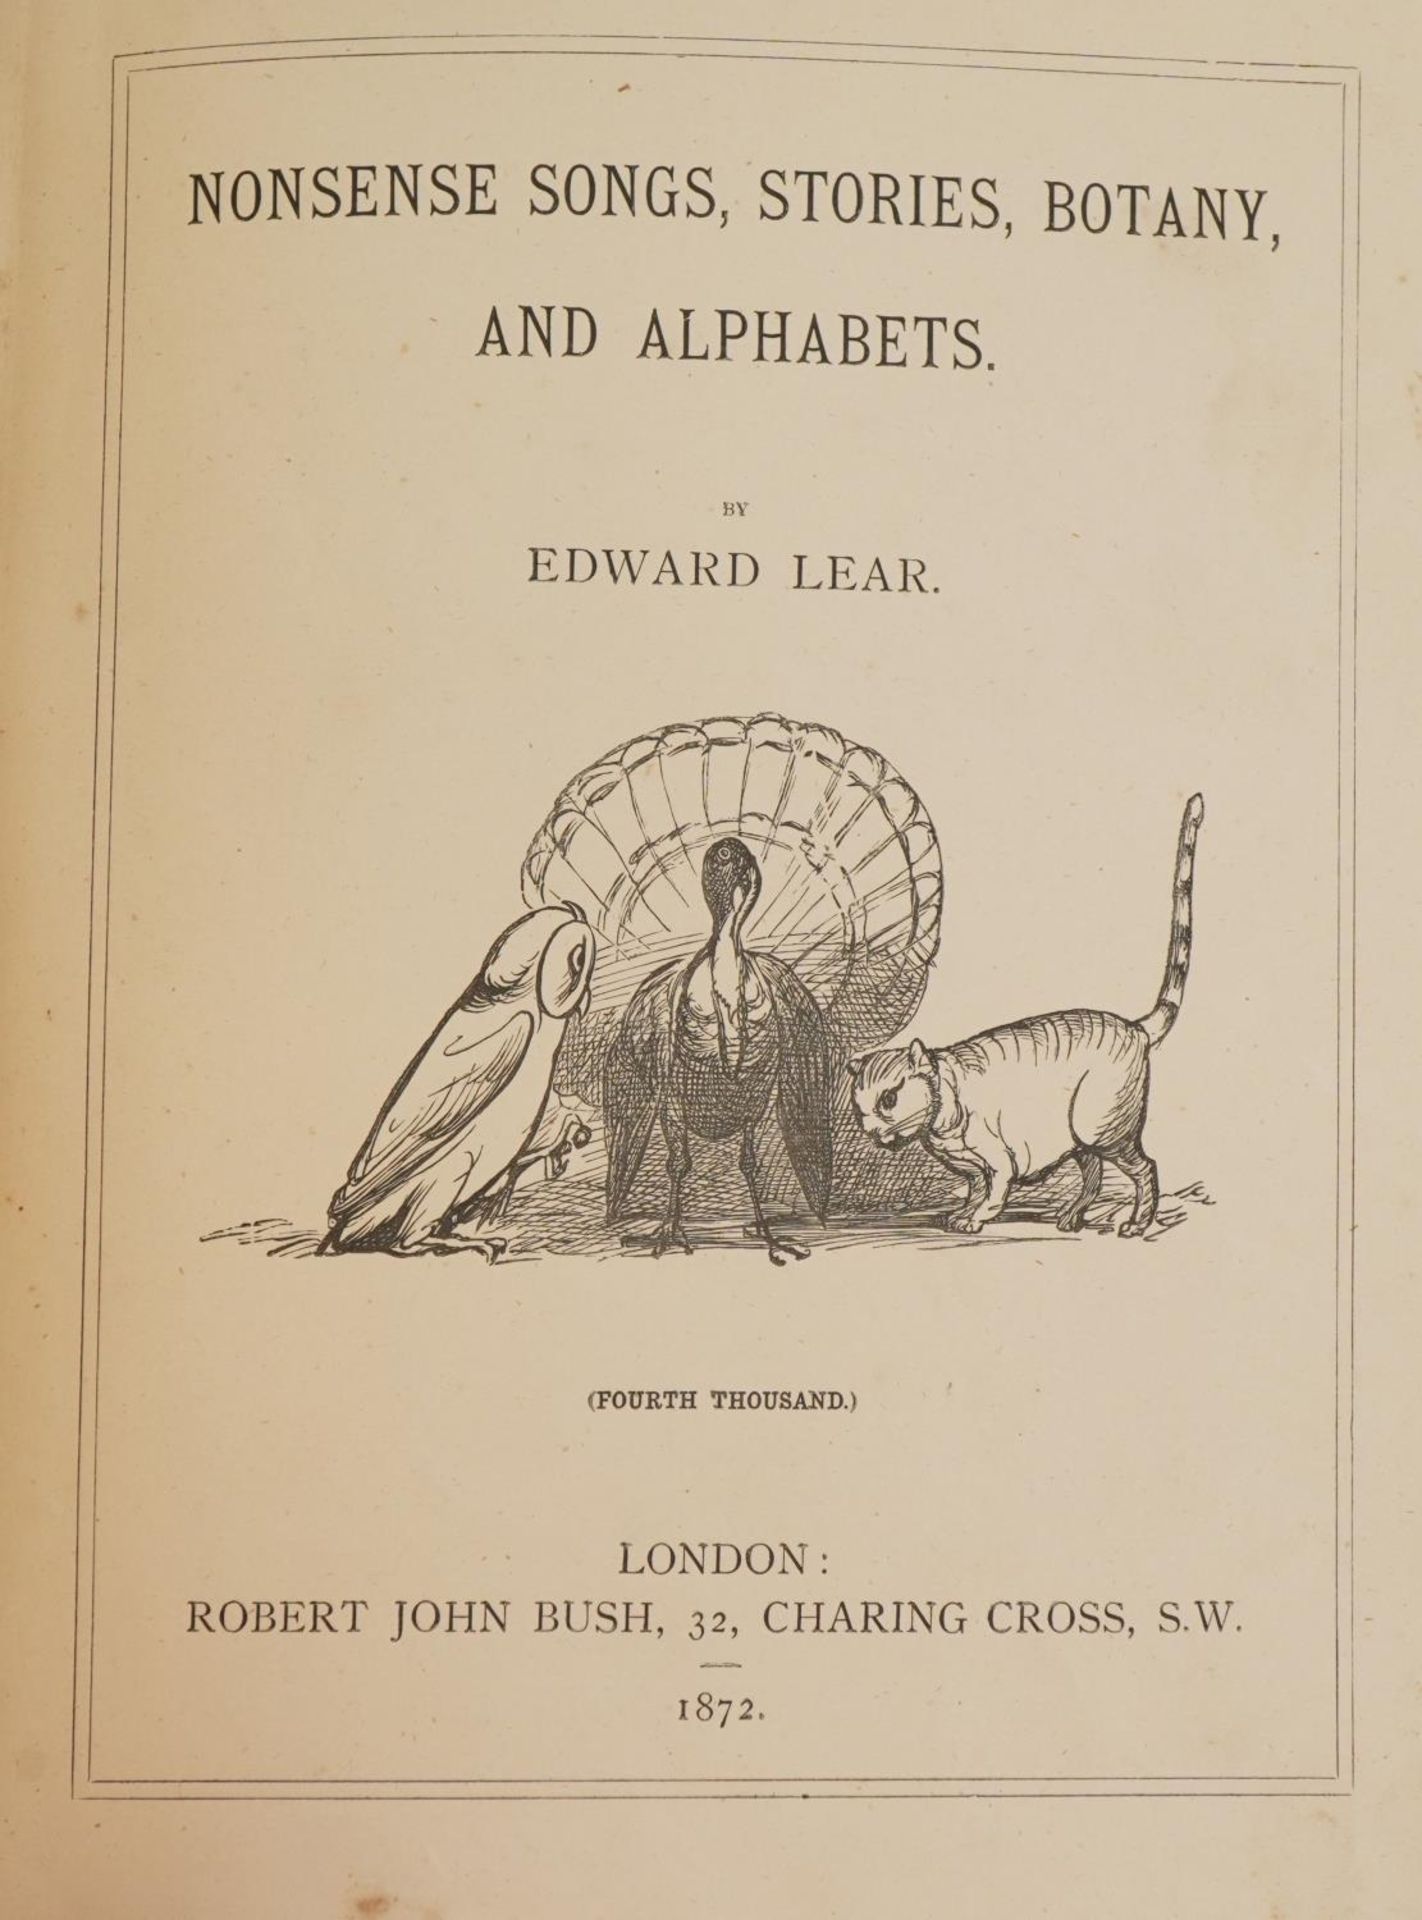 Nonsense Songs, Stories, Botany and Alphabets hardback book by Edward Lear, published London - Image 2 of 3